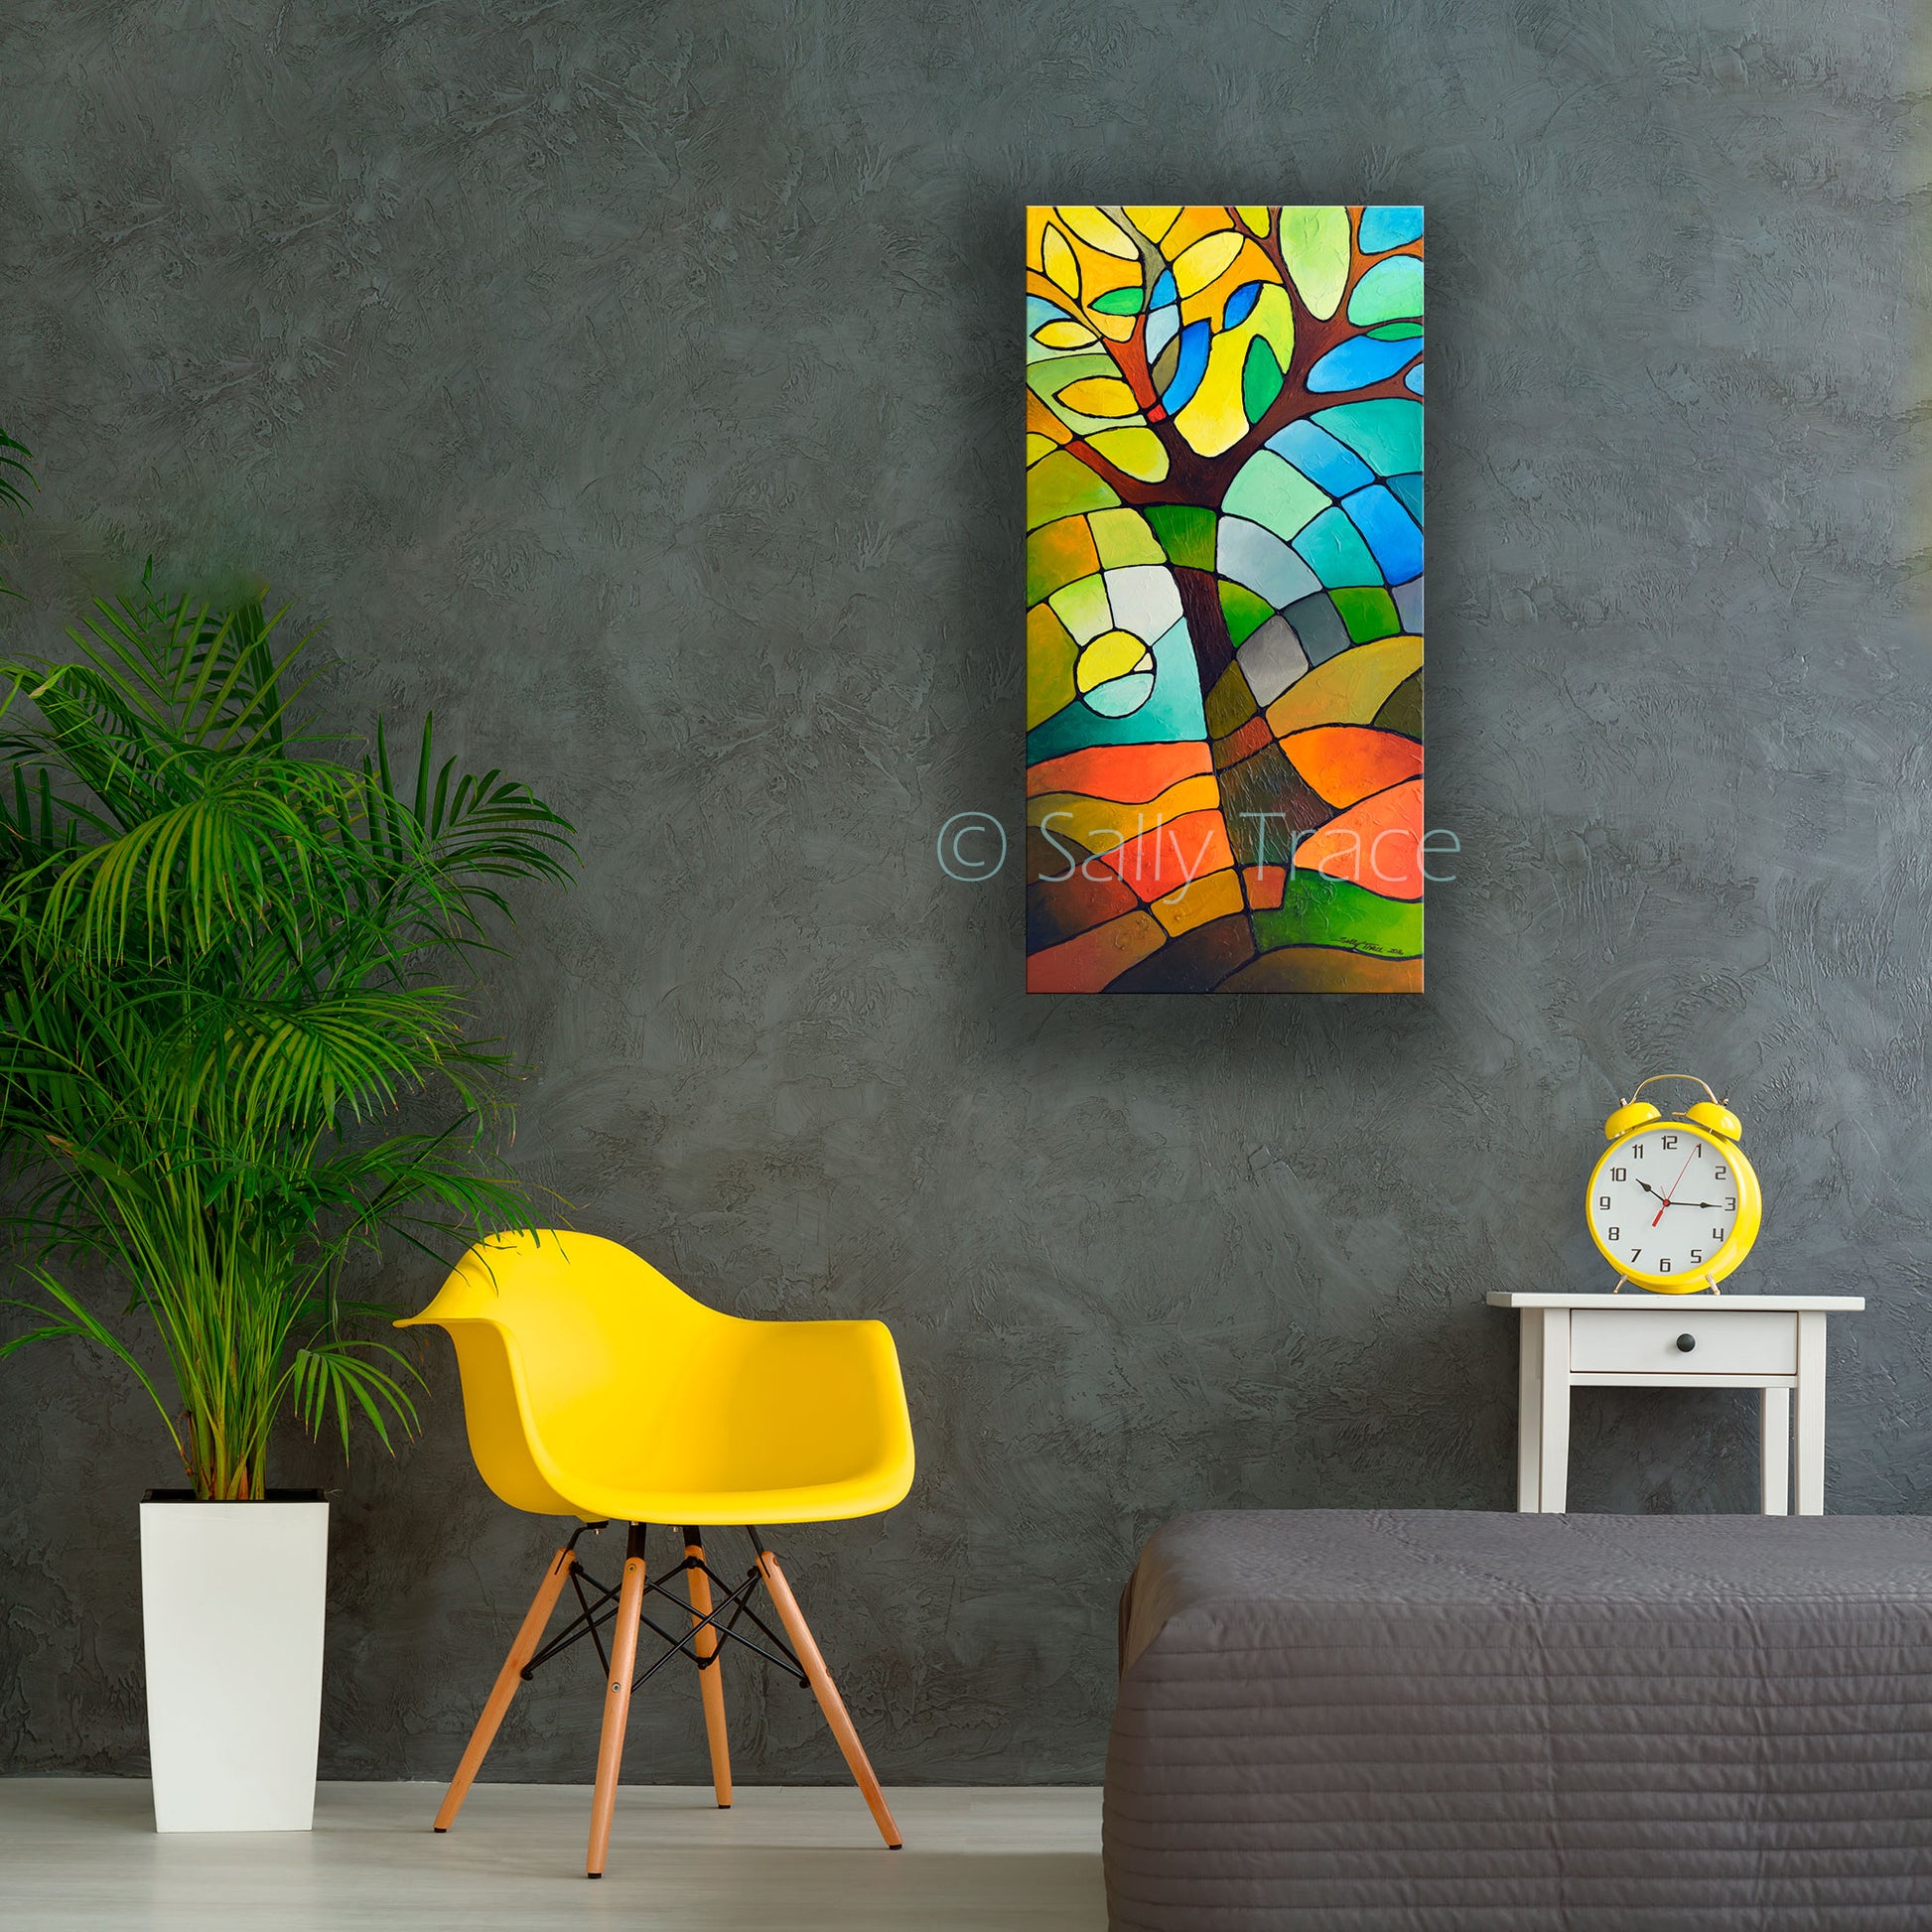 Modern abstract geometric abstraction landscape painting giclee print "Sumer Tree", room view